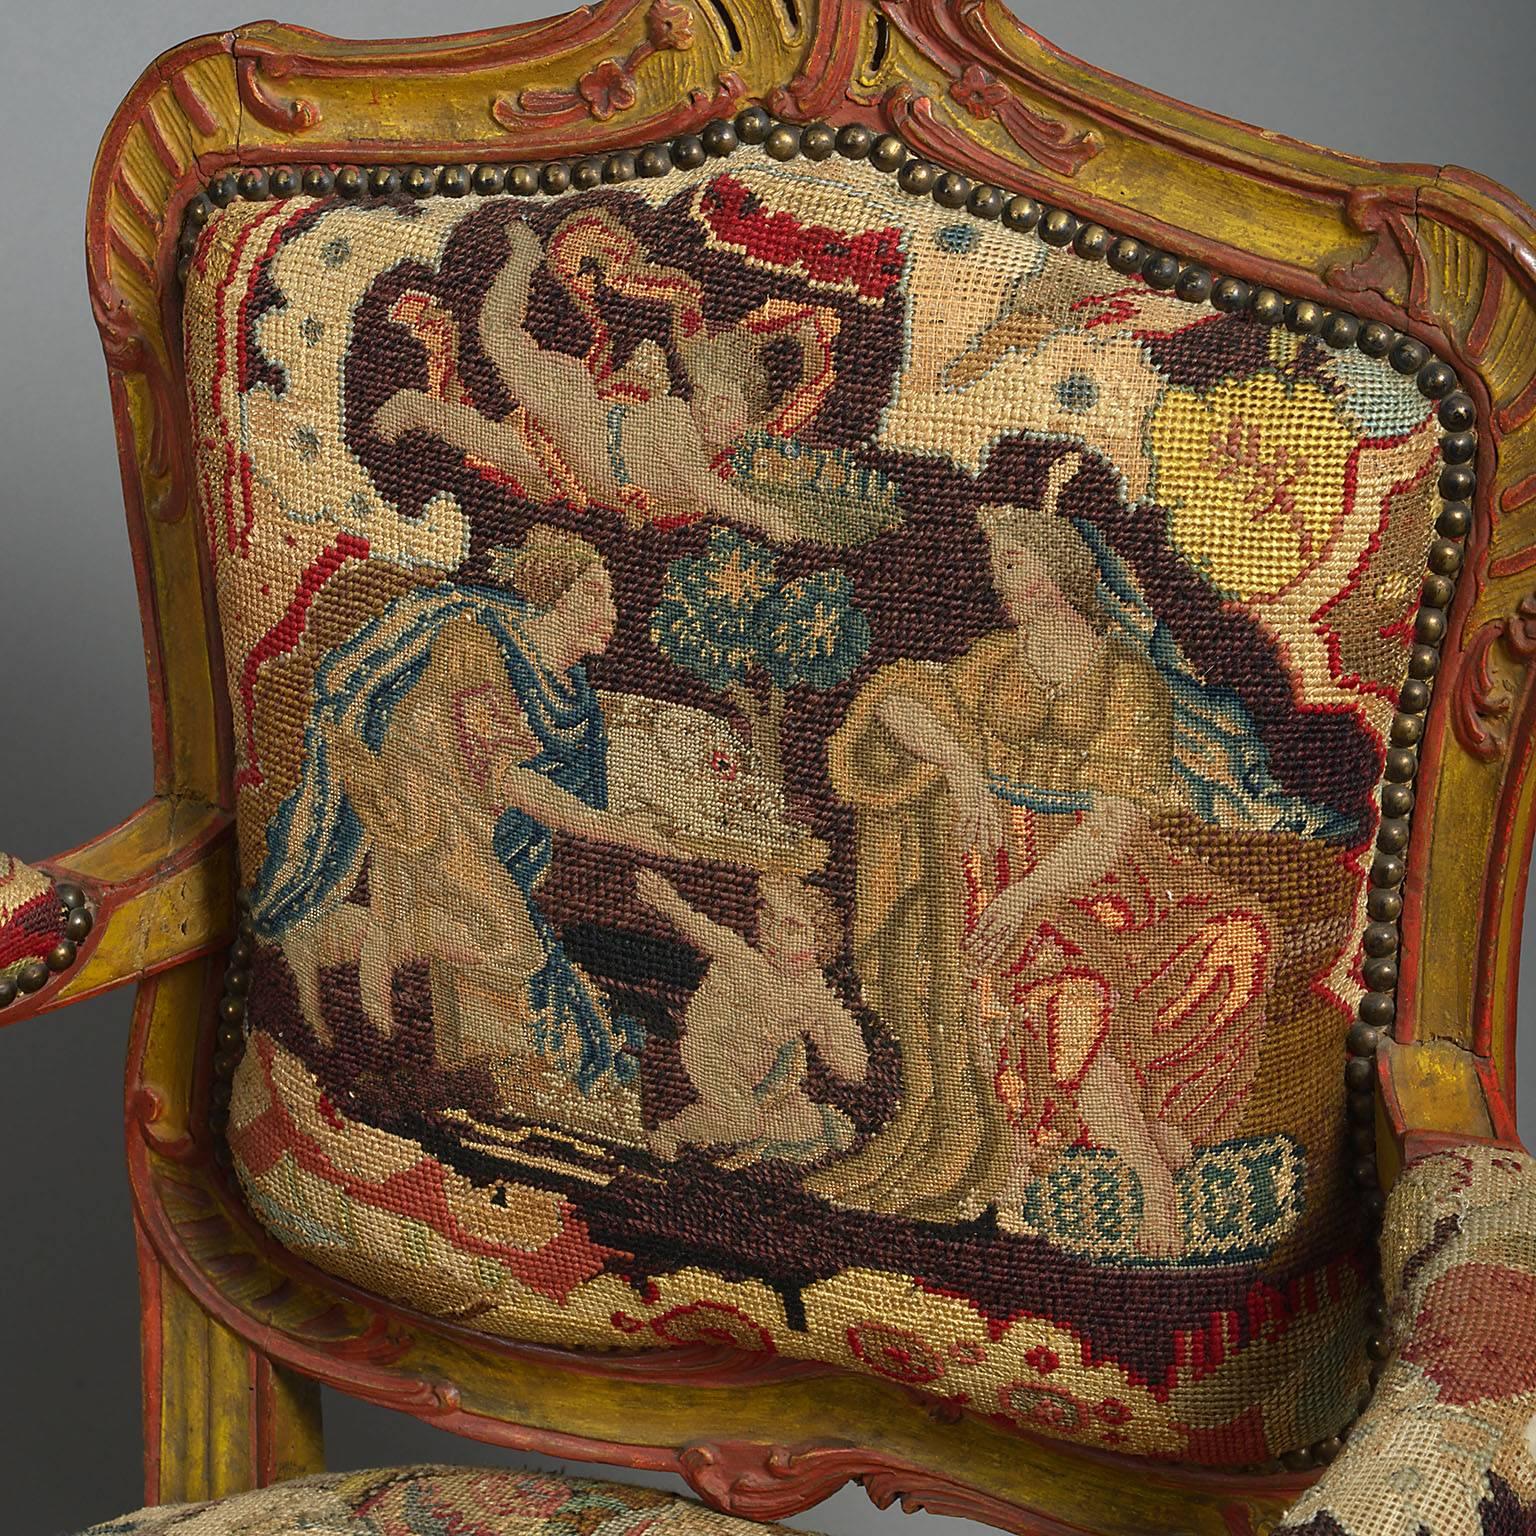 Pair of 18th century Bavarian painted armchairs
With stuffed cartouche-shaped backs, padded arms and stuffed seats all covered in 18th century needlework, the frames and cabriole legs carved with Rococo scrollwork; painted decoration